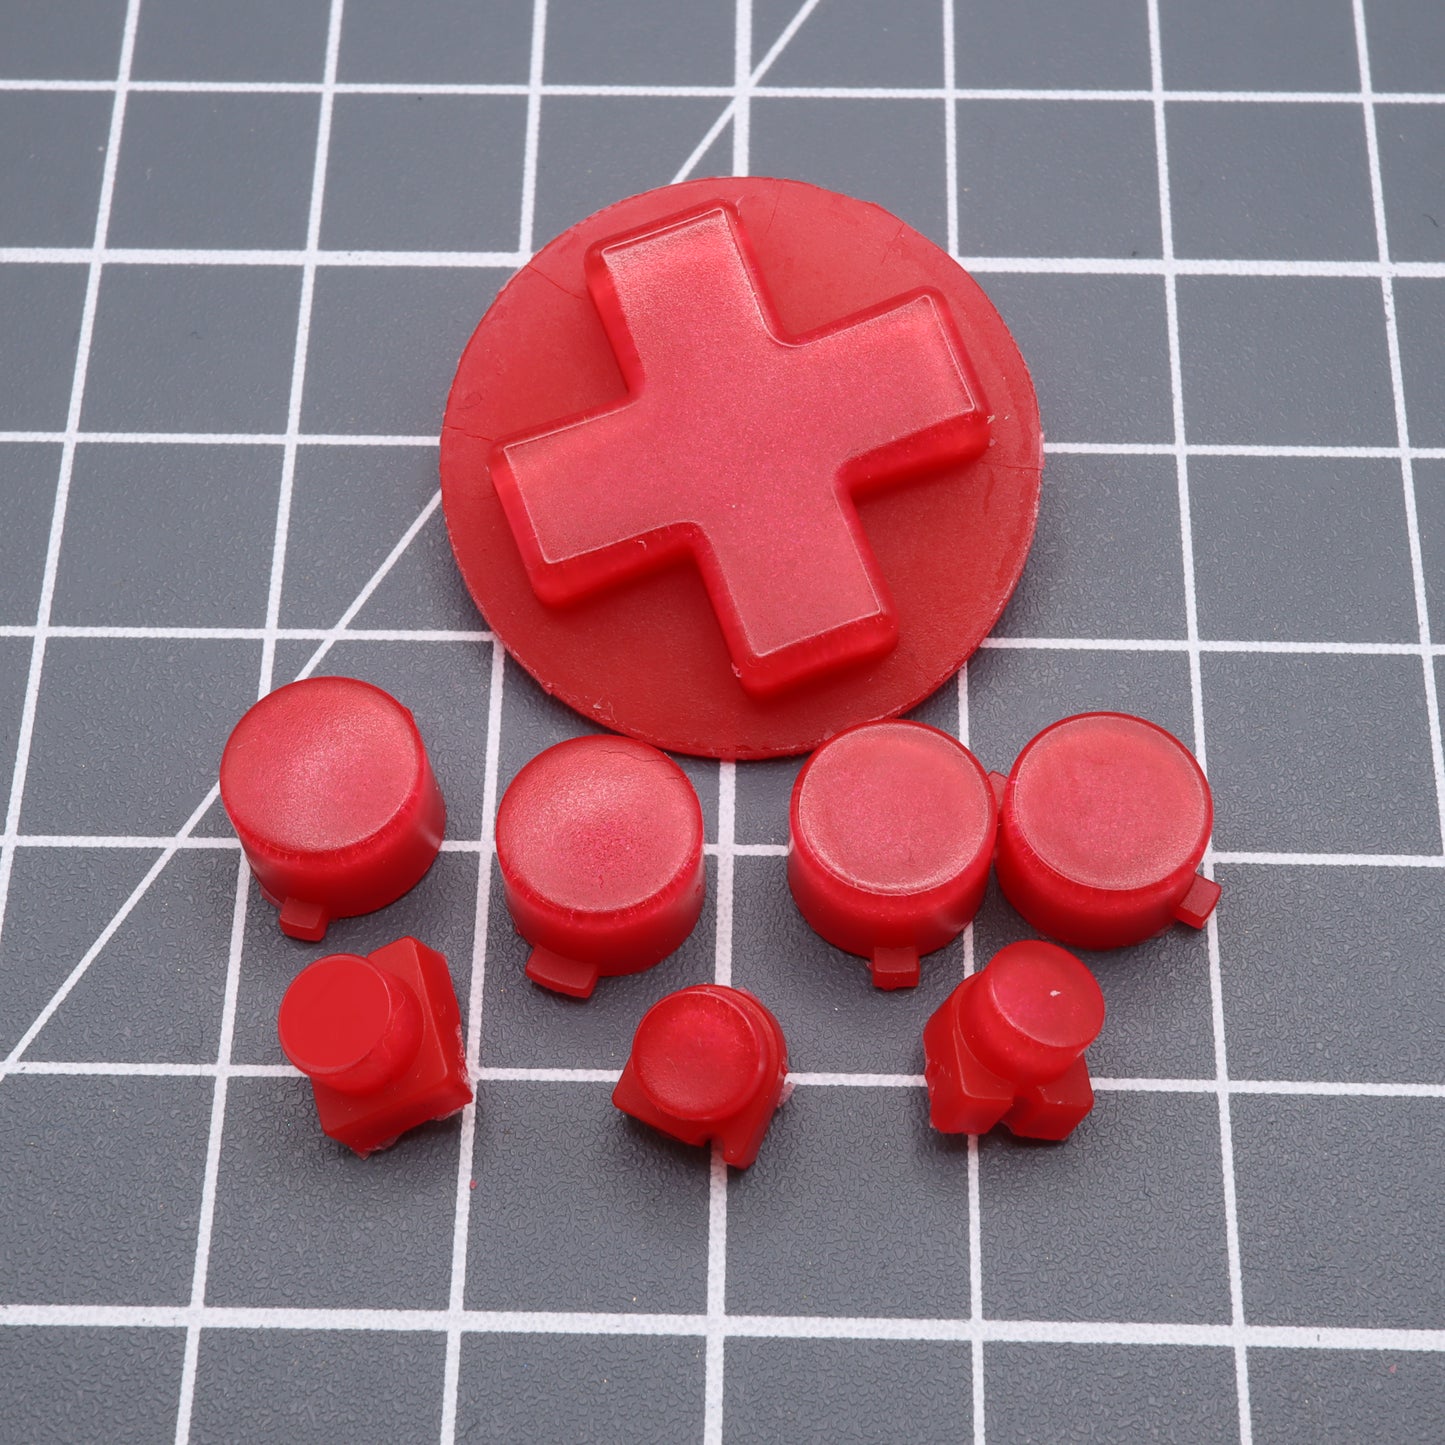 Lab Fifteen co custom resin Strawberry Candy button set for the Analogue Pocket